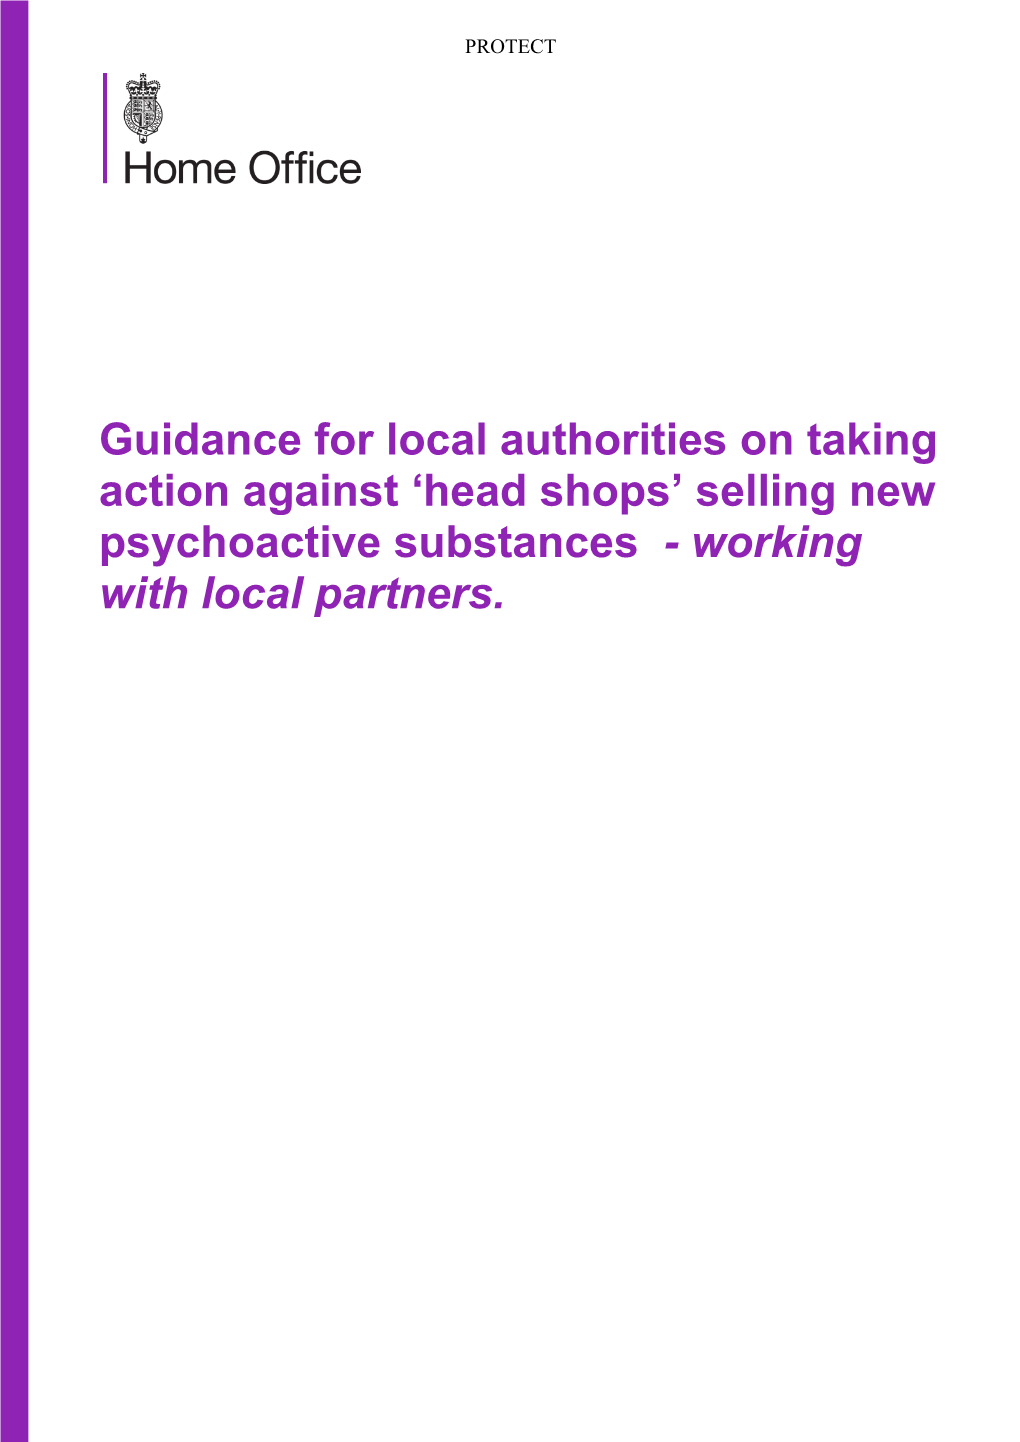 Guidance for Local Authorities on Taking Action Against 'Head Shops